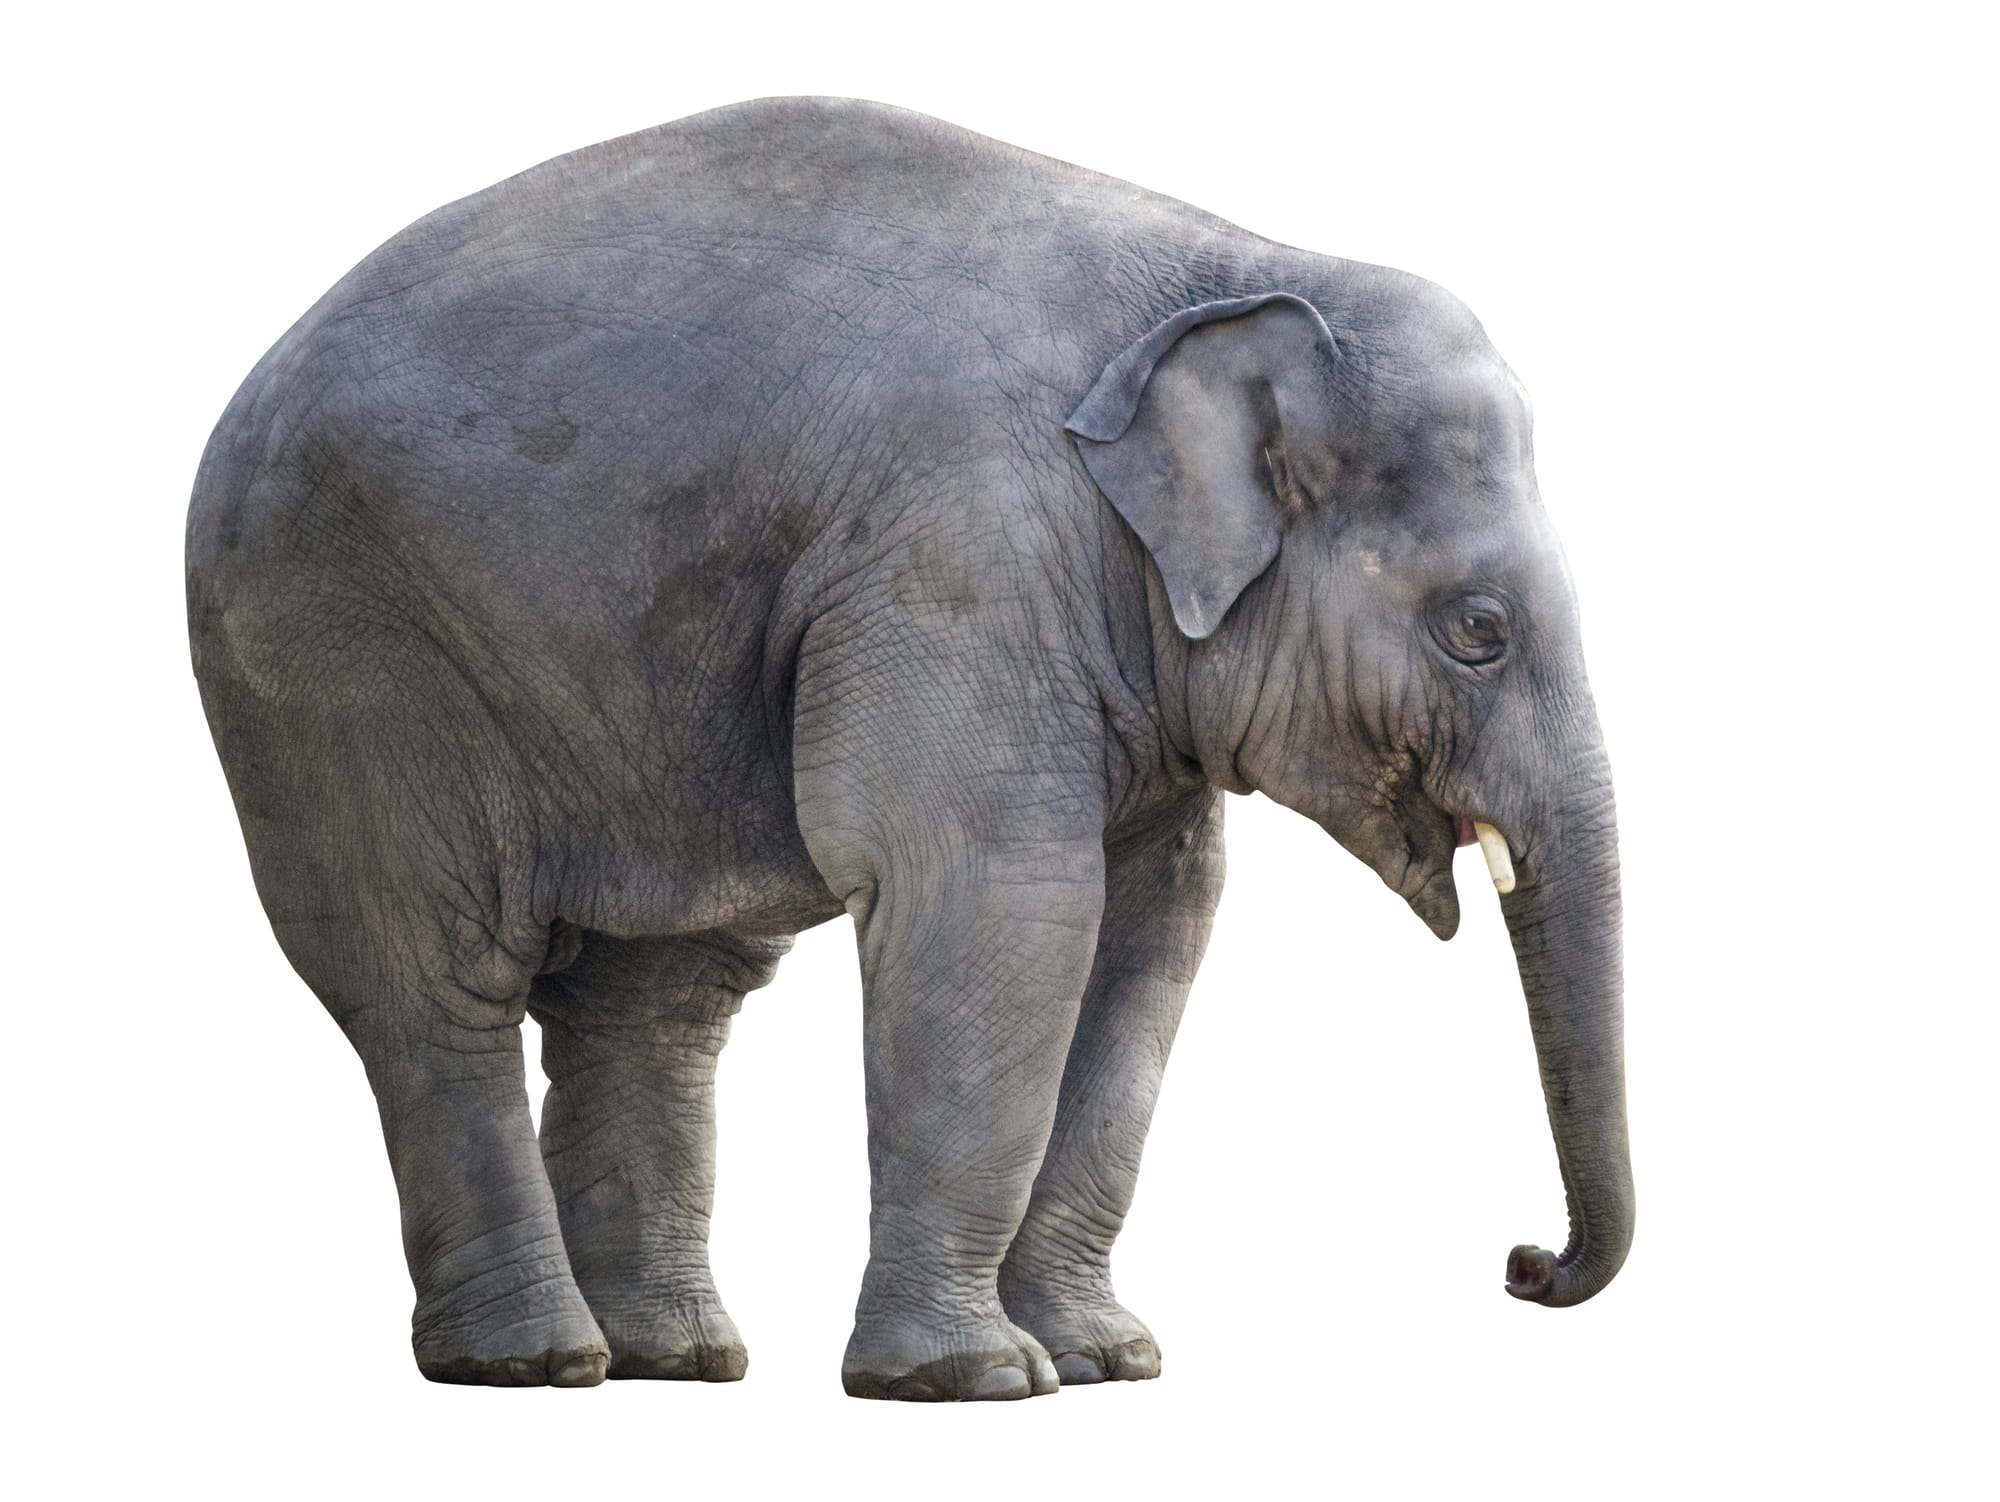 Dominance, Competition & DFC: The Elephant in the Room